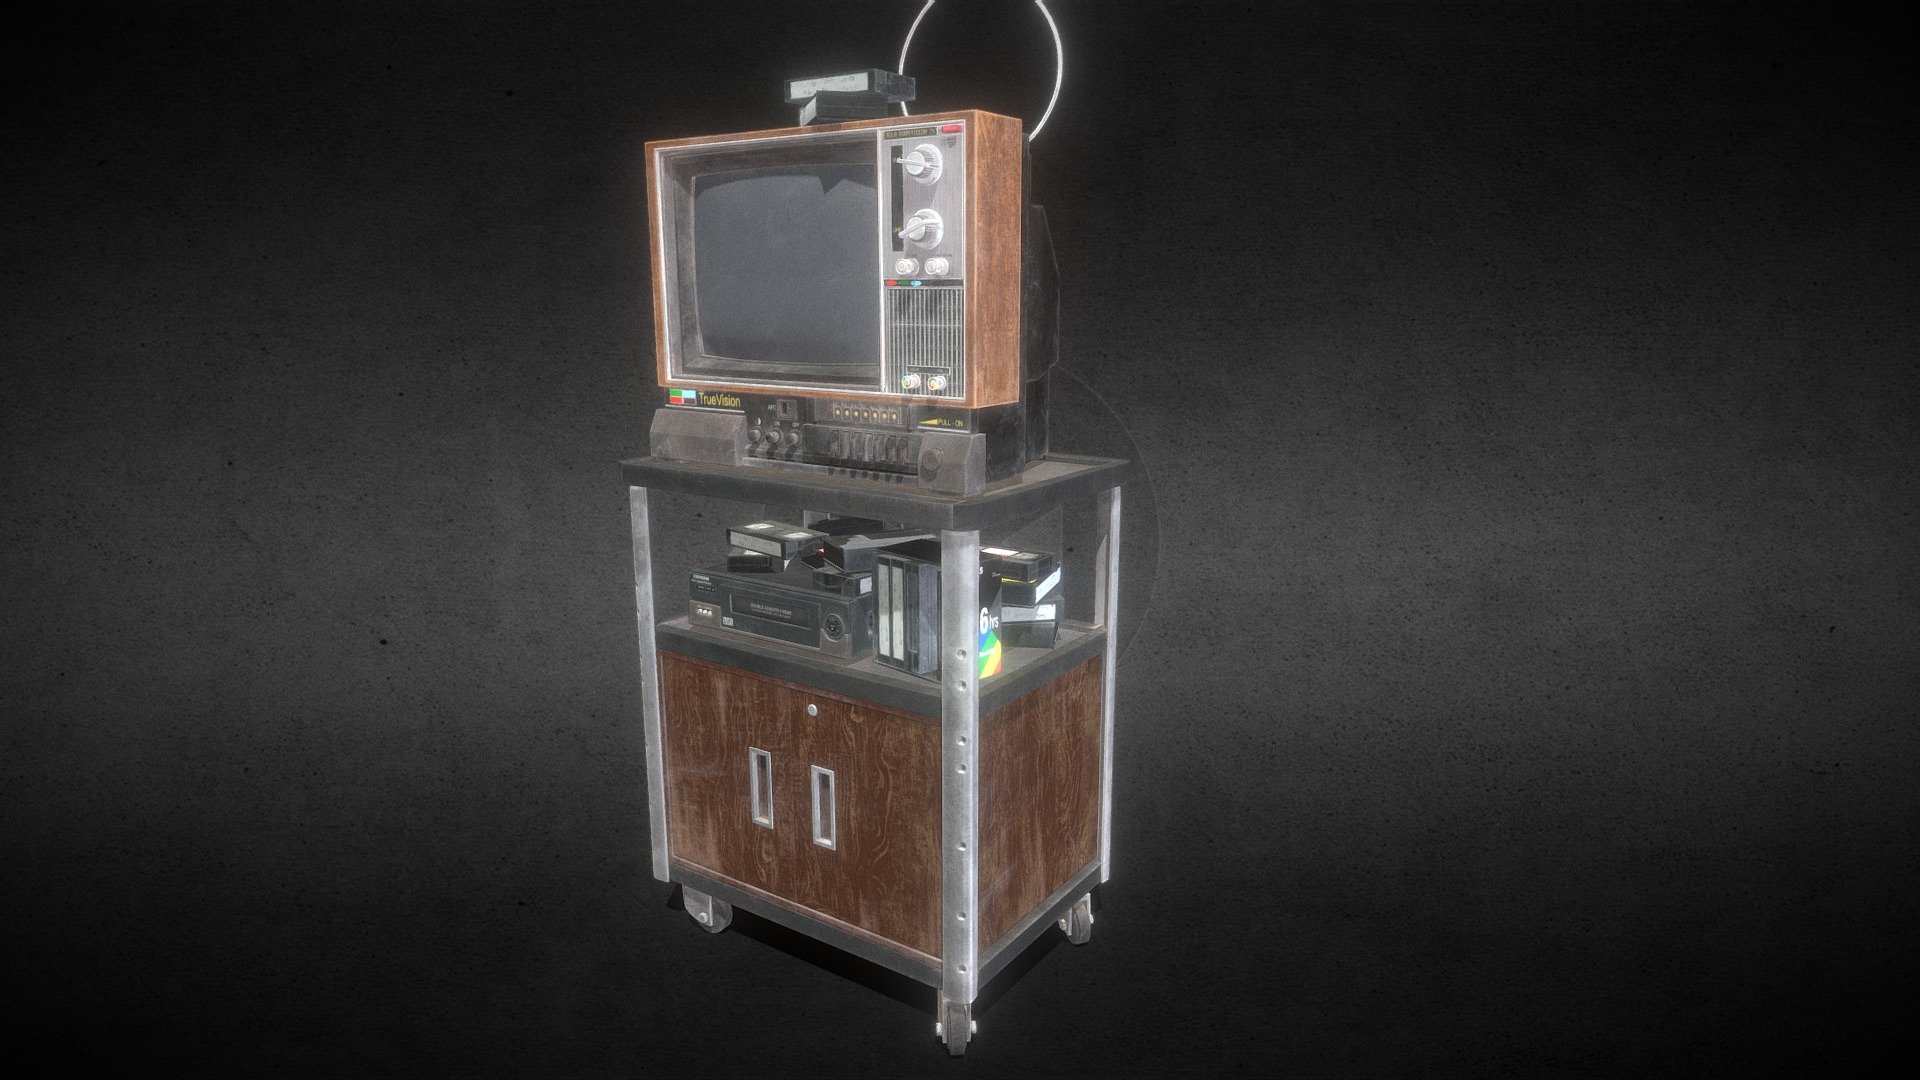 A Old TV set with a vhs and a trolley ready for a game engine I included the OBJ, FBX, 3DSMAX file and the textures PBR Base color, metallic, AO, Normal map, Opacity, only the trolley and roughness the model has 15,089 tris 26,922 verts 15,444 the textures size are 4096x4096 the format of the textures are png and targa if you need 3d game assets or stl files I can do commission works 3d model